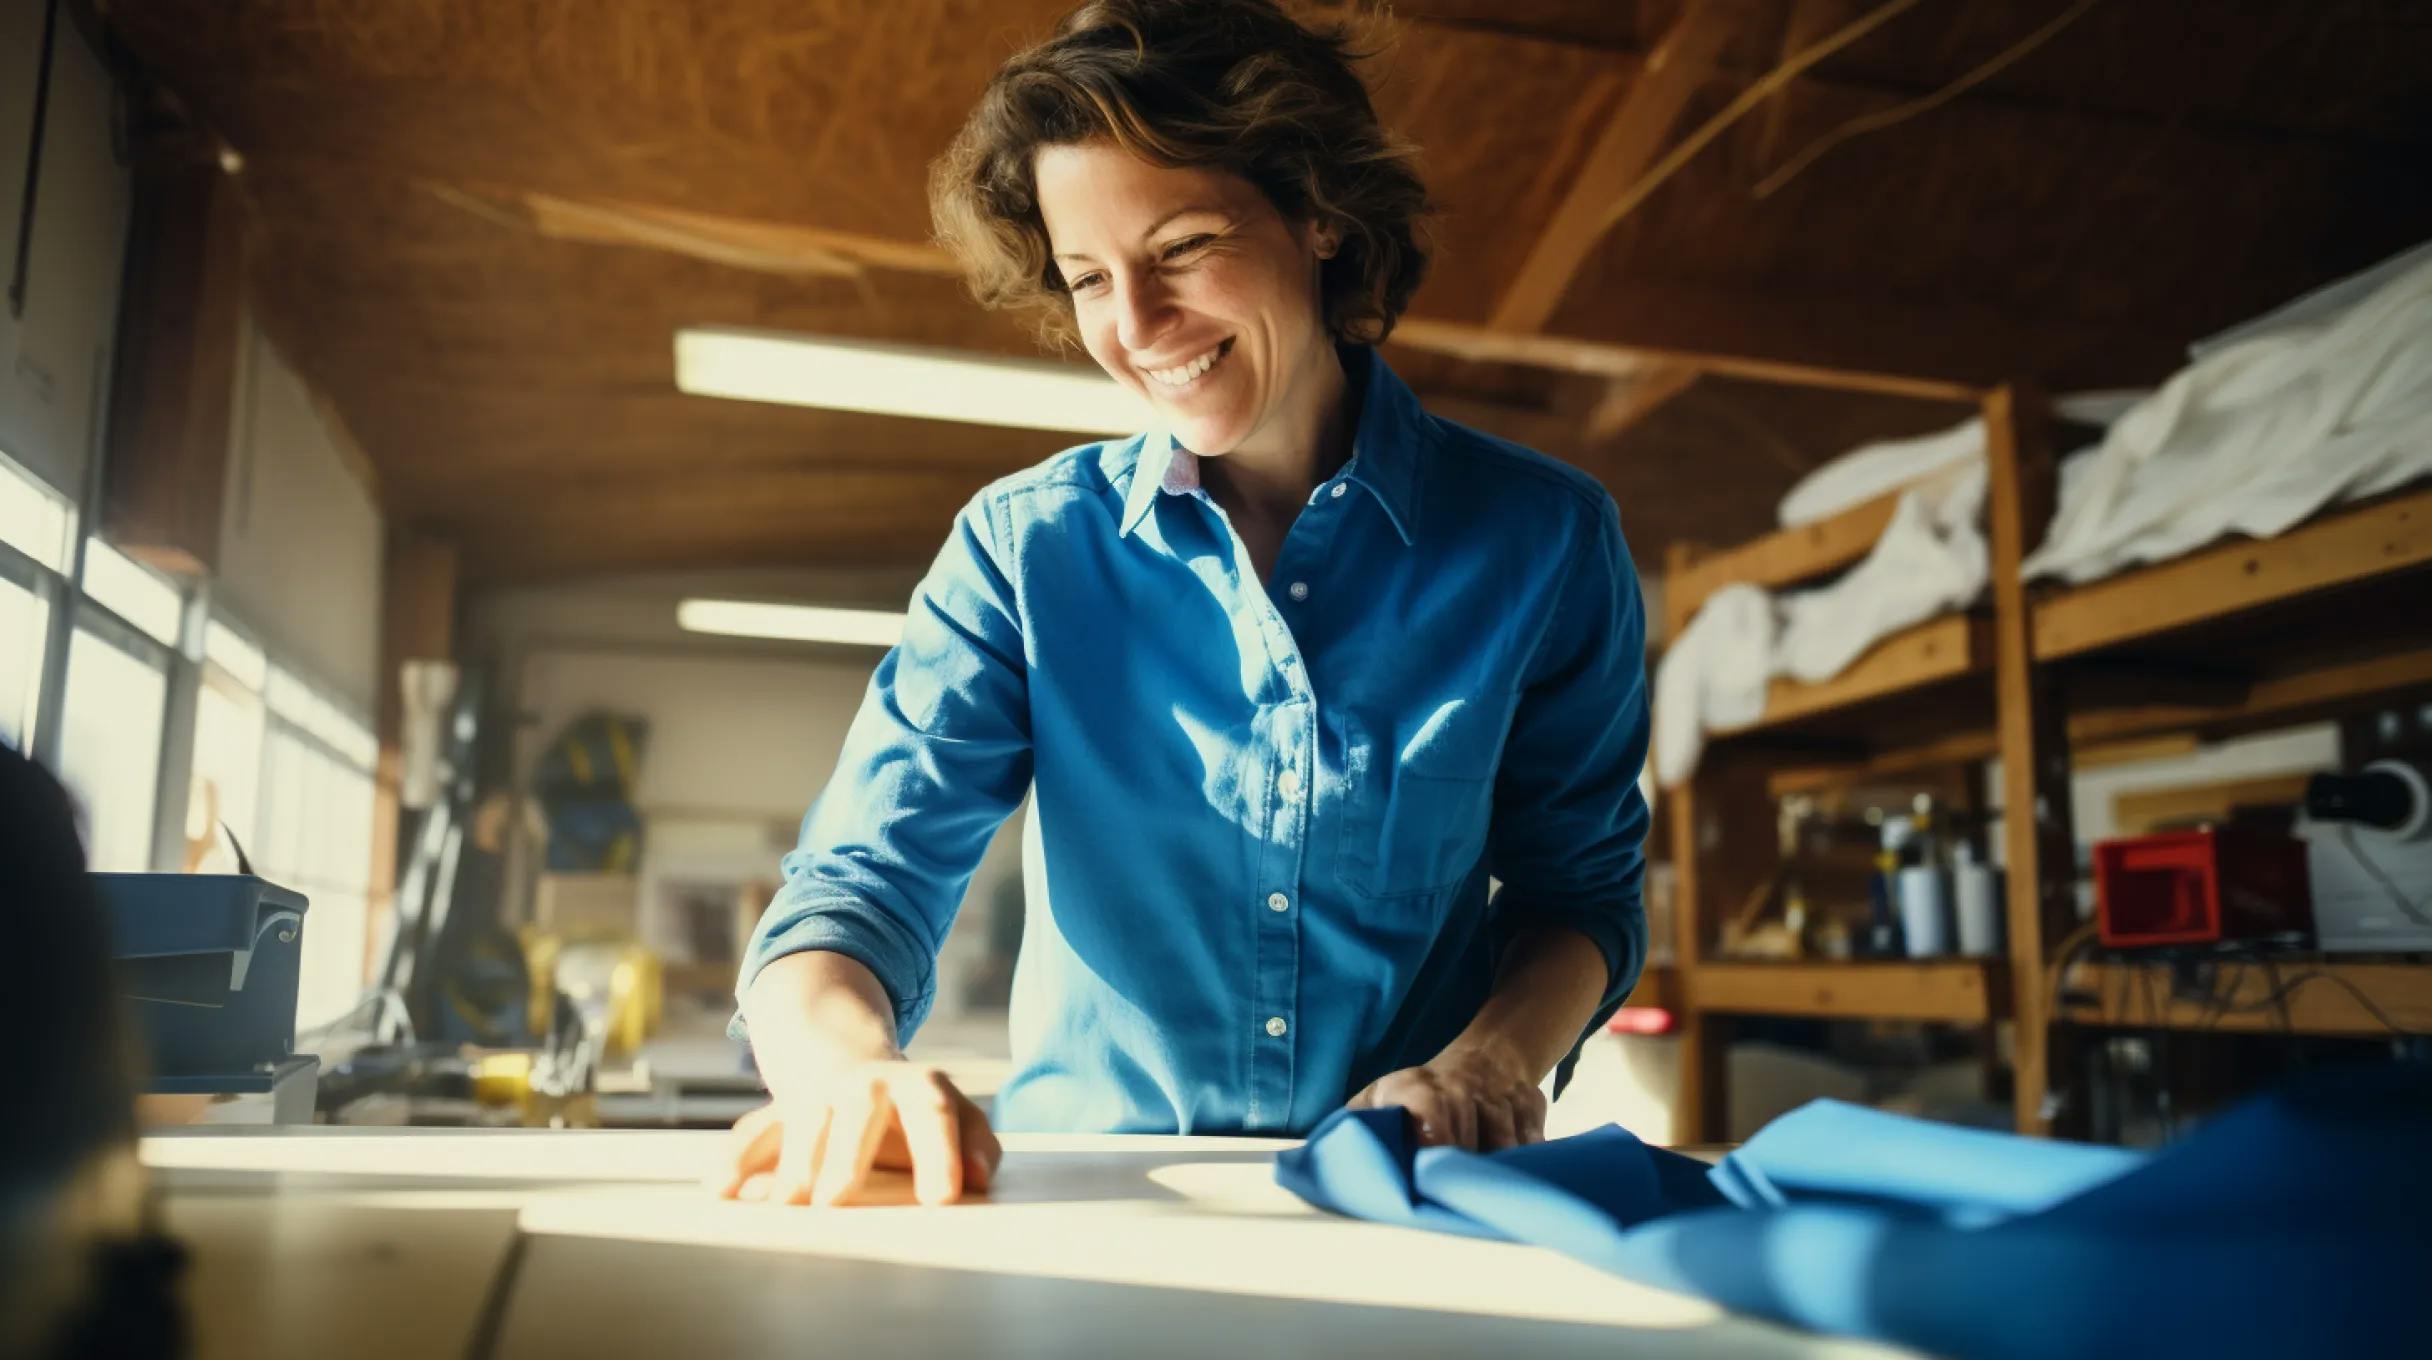 A woman in a blue shirt skillfully crafting fabric with focused determination.